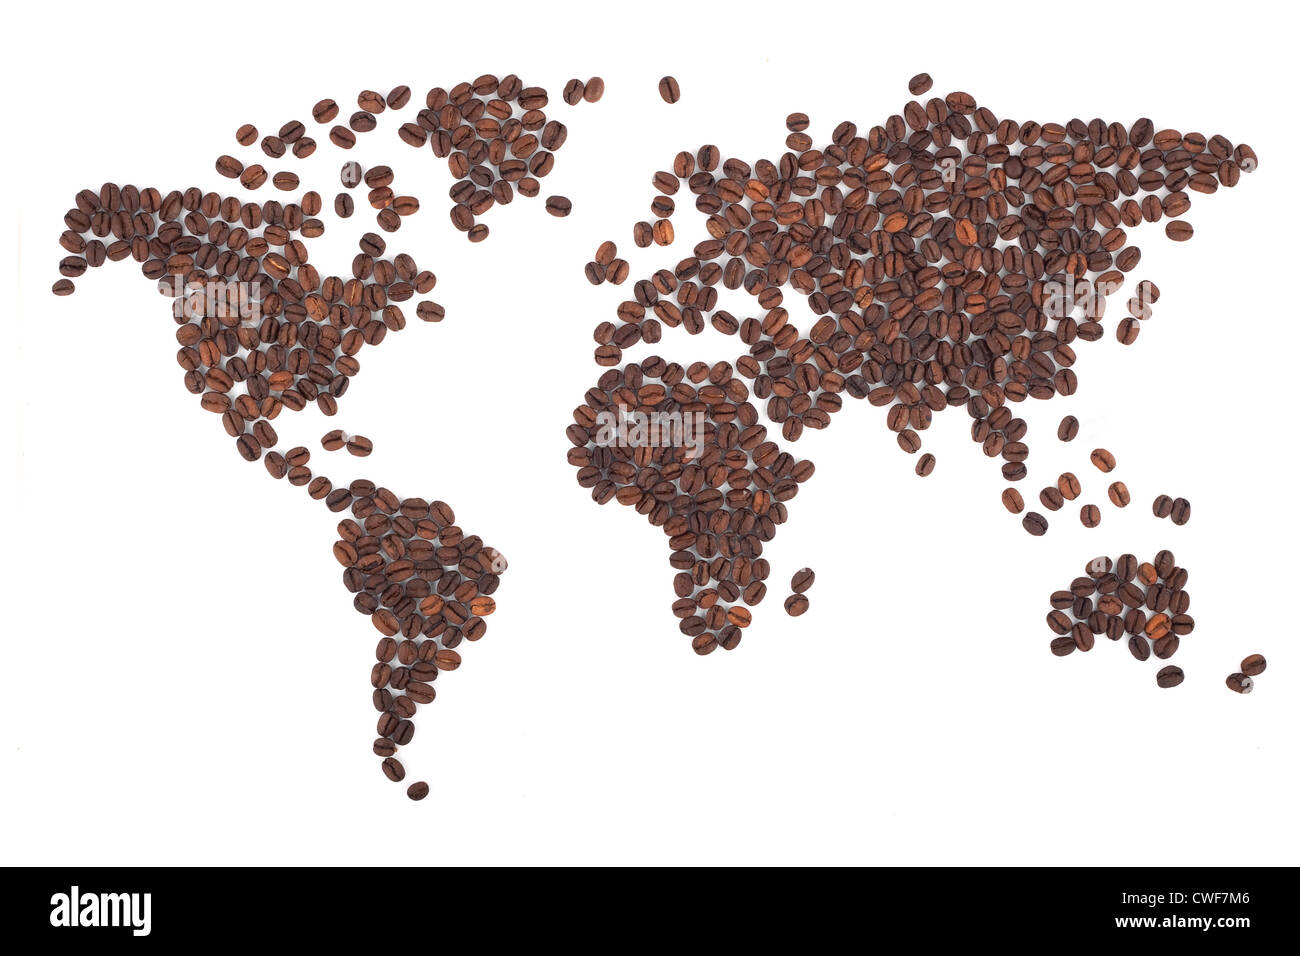 Coffee map made of beans on white background Stock Photo